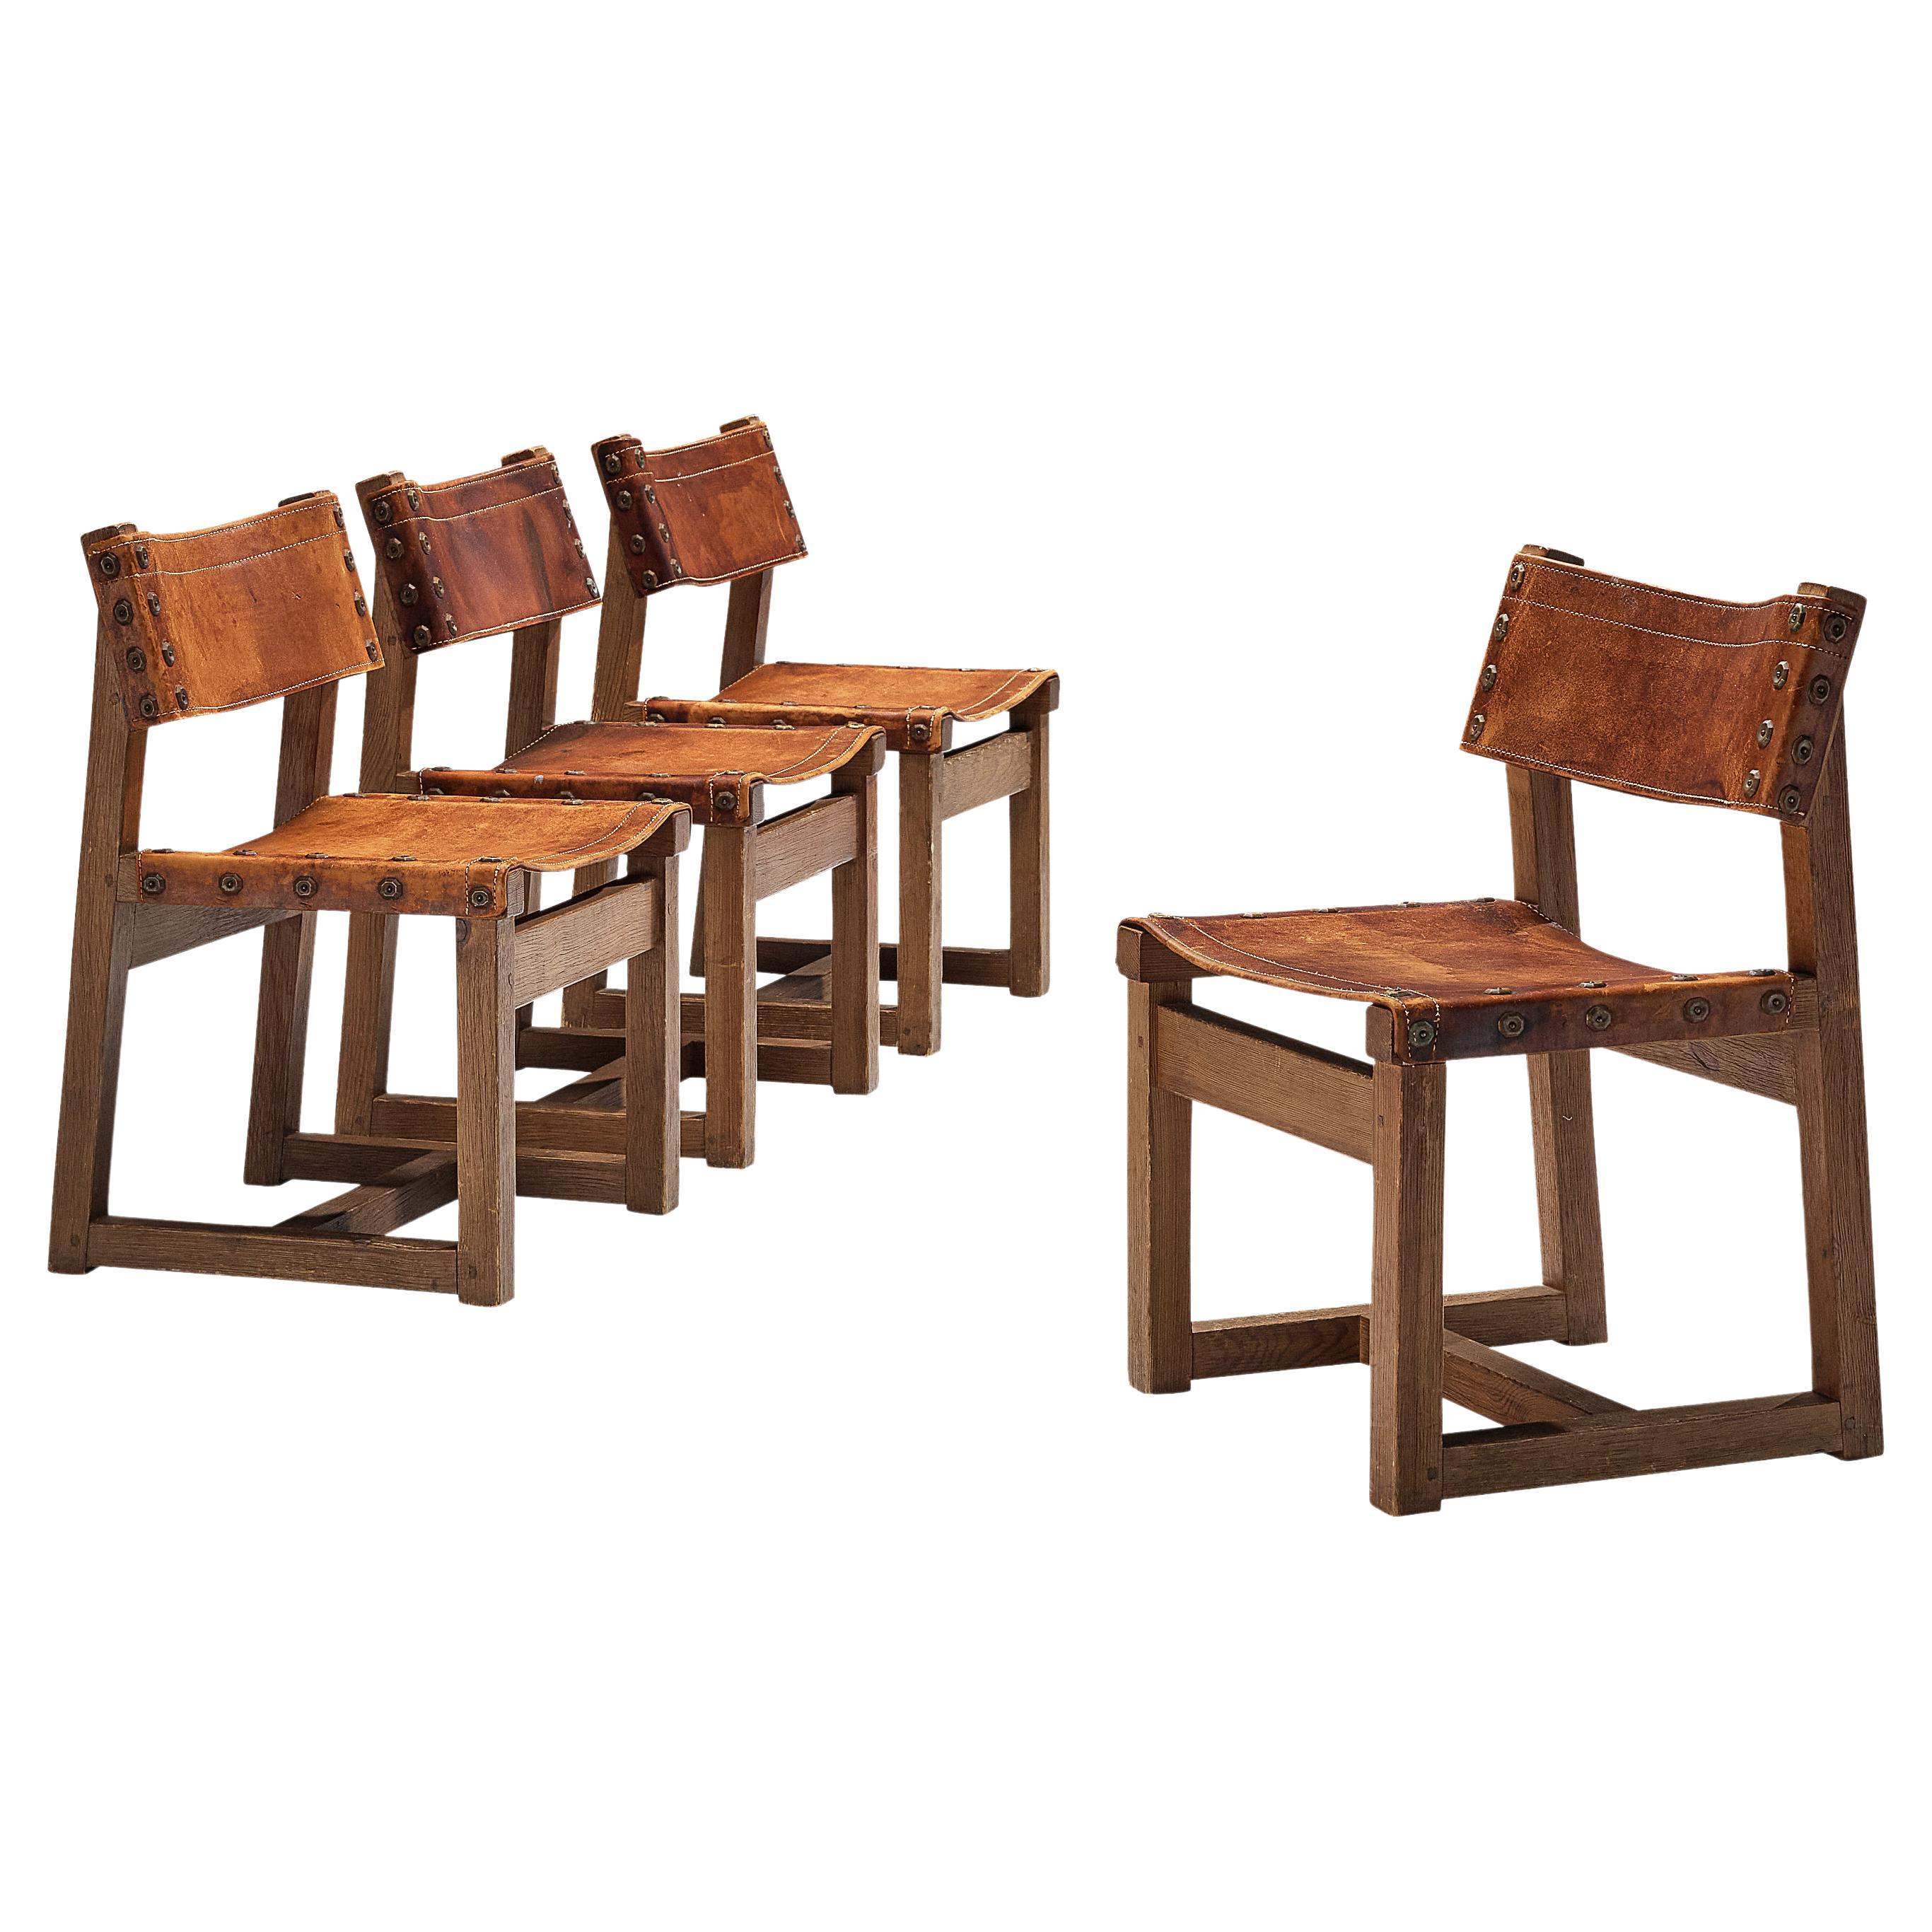 Brutalist Spanish Biosca Set of Four Dining chairs in Cognac Leather